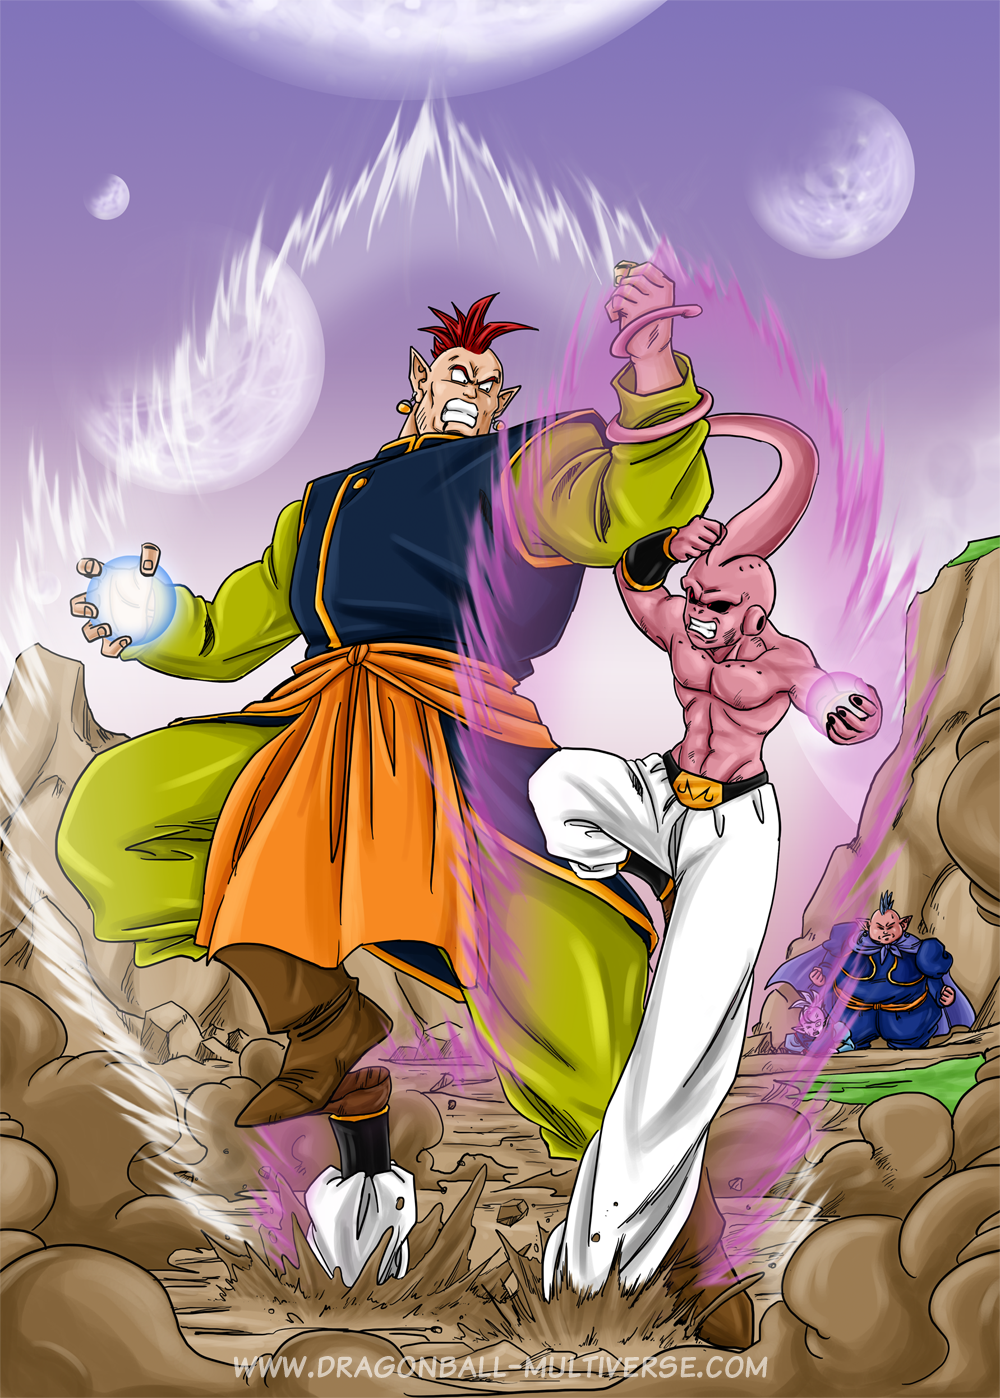 The link between Dragon Ball Daima and the Majin Buu saga hints at its  place in the timeline - Meristation